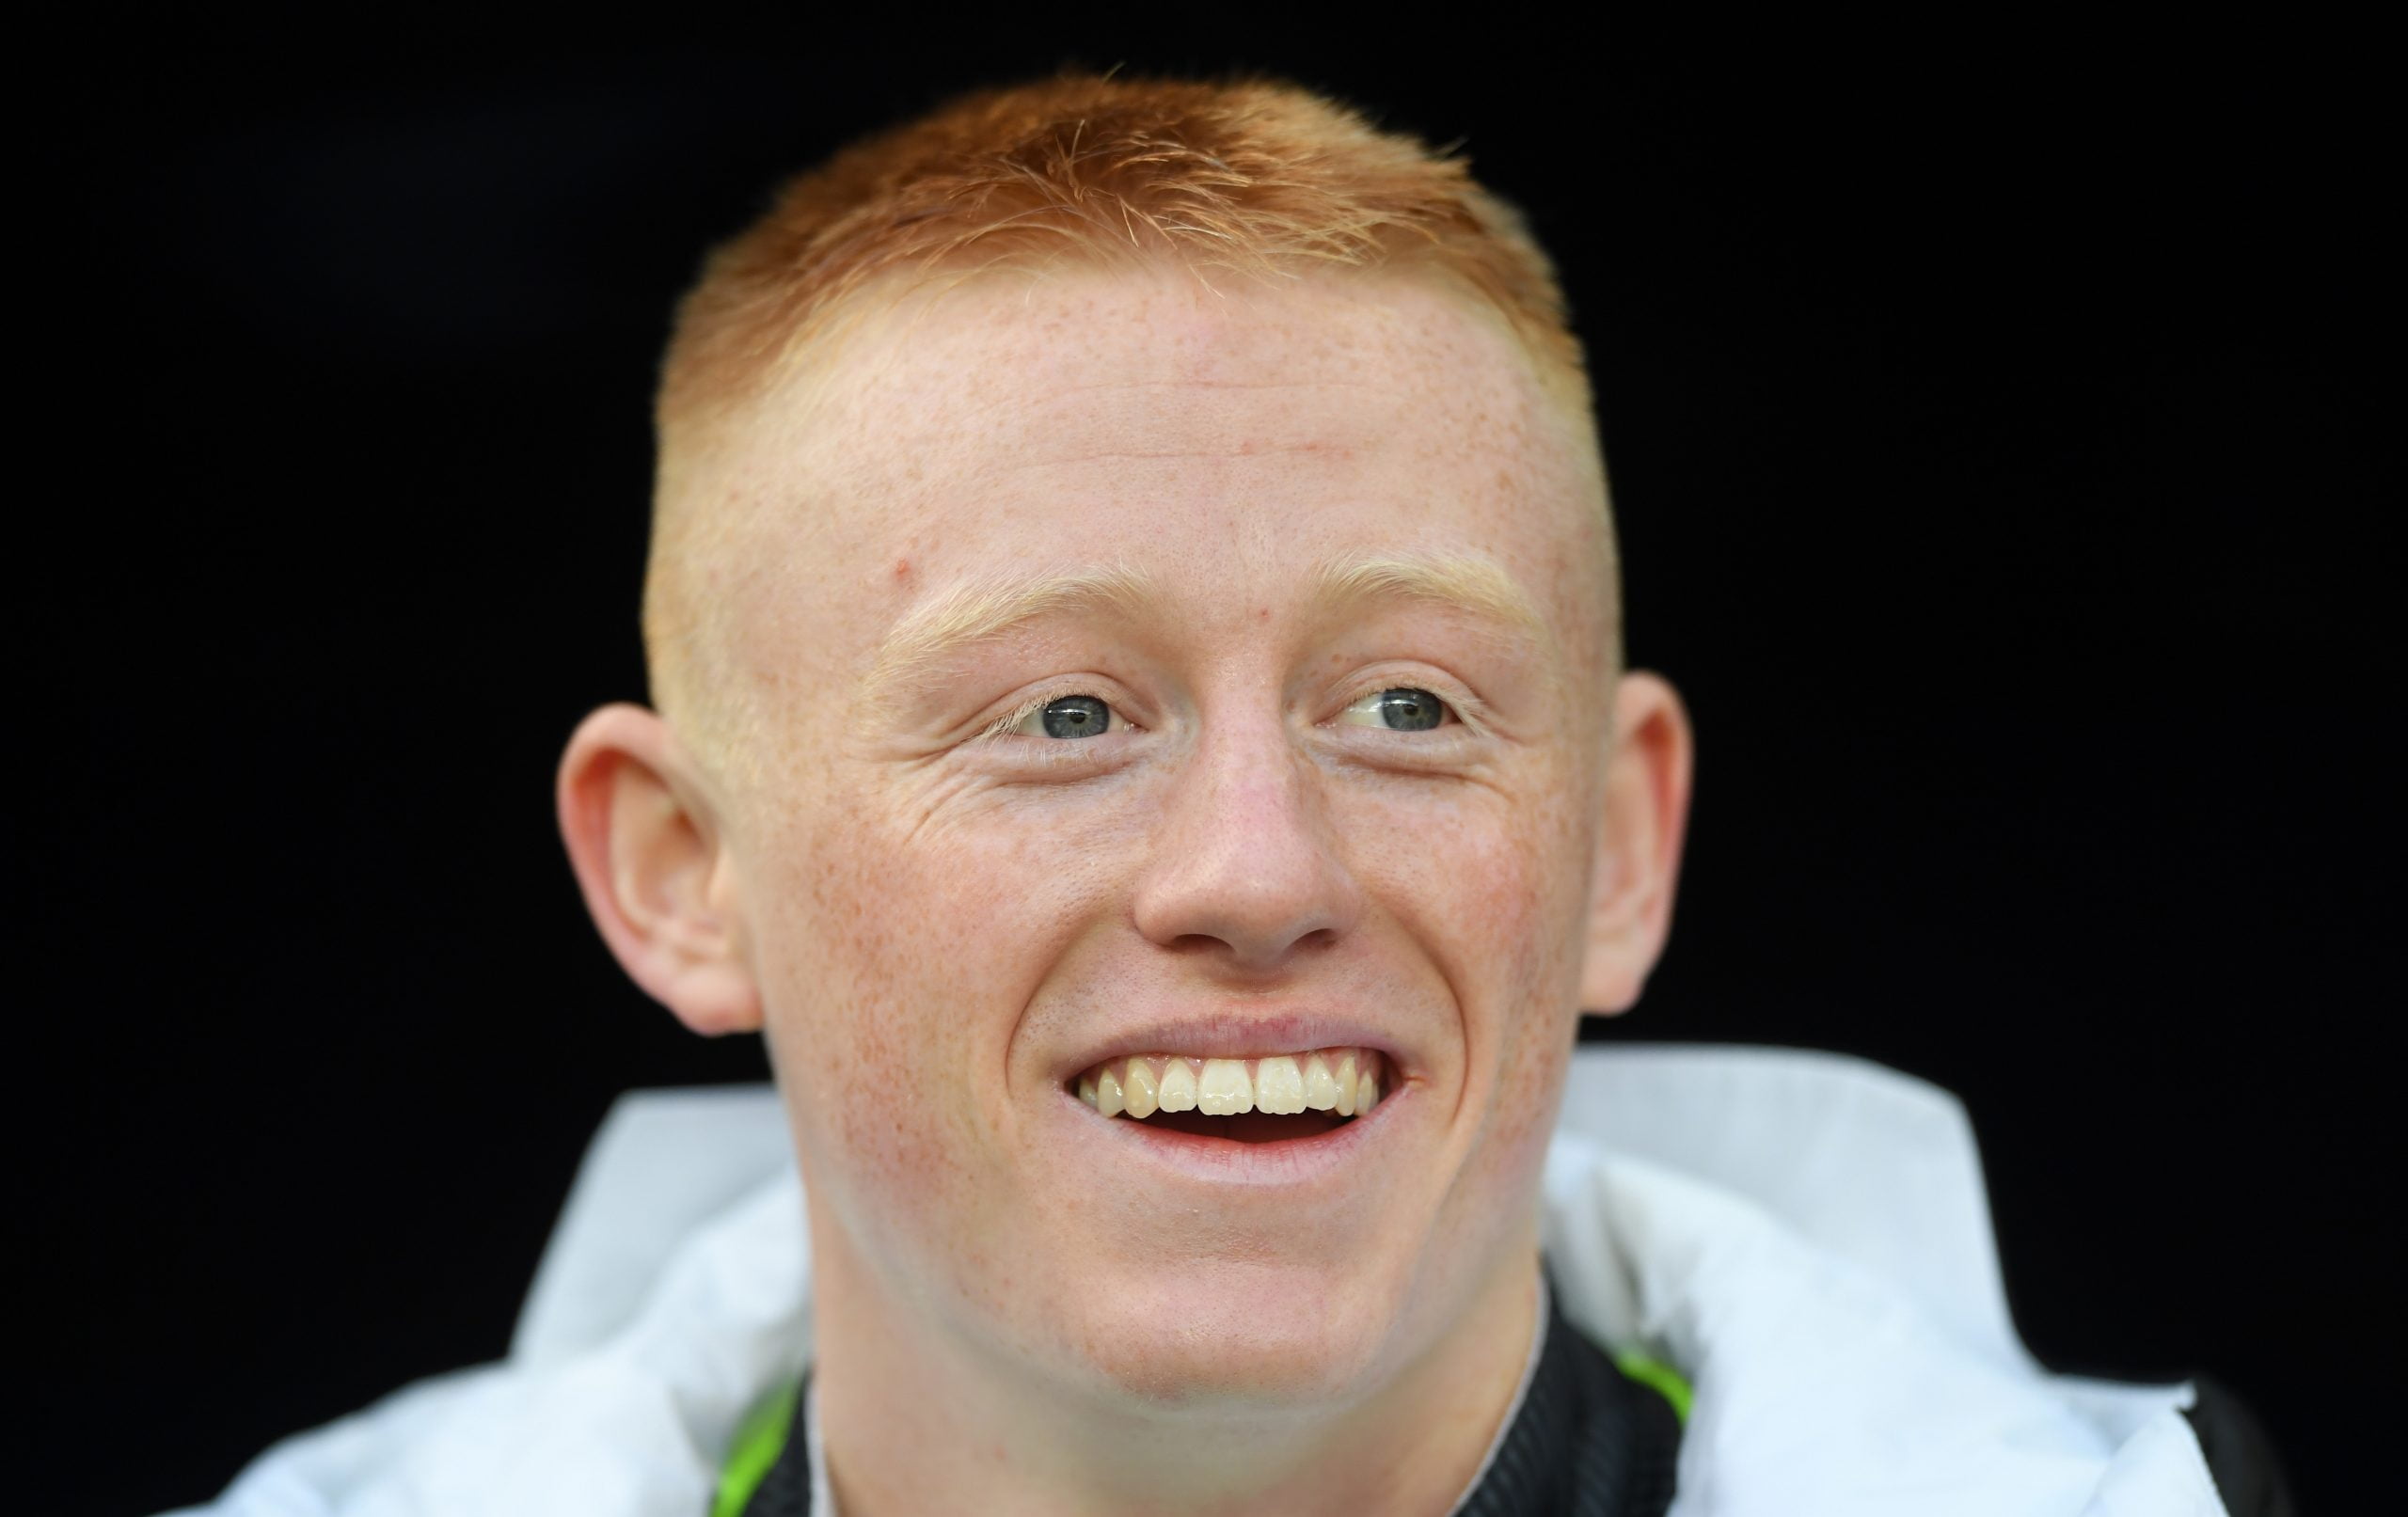 NEWCASTLE UPON TYNE, ENGLAND - NOVEMBER 30: Newcastle player Matty Longstaff smiles ahead of the Premier League match between Newcastle United and Manchester City at St. James Park on November 30, 2019 in Newcastle upon Tyne, United Kingdom. (Photo by Stu Forster/Getty Images)